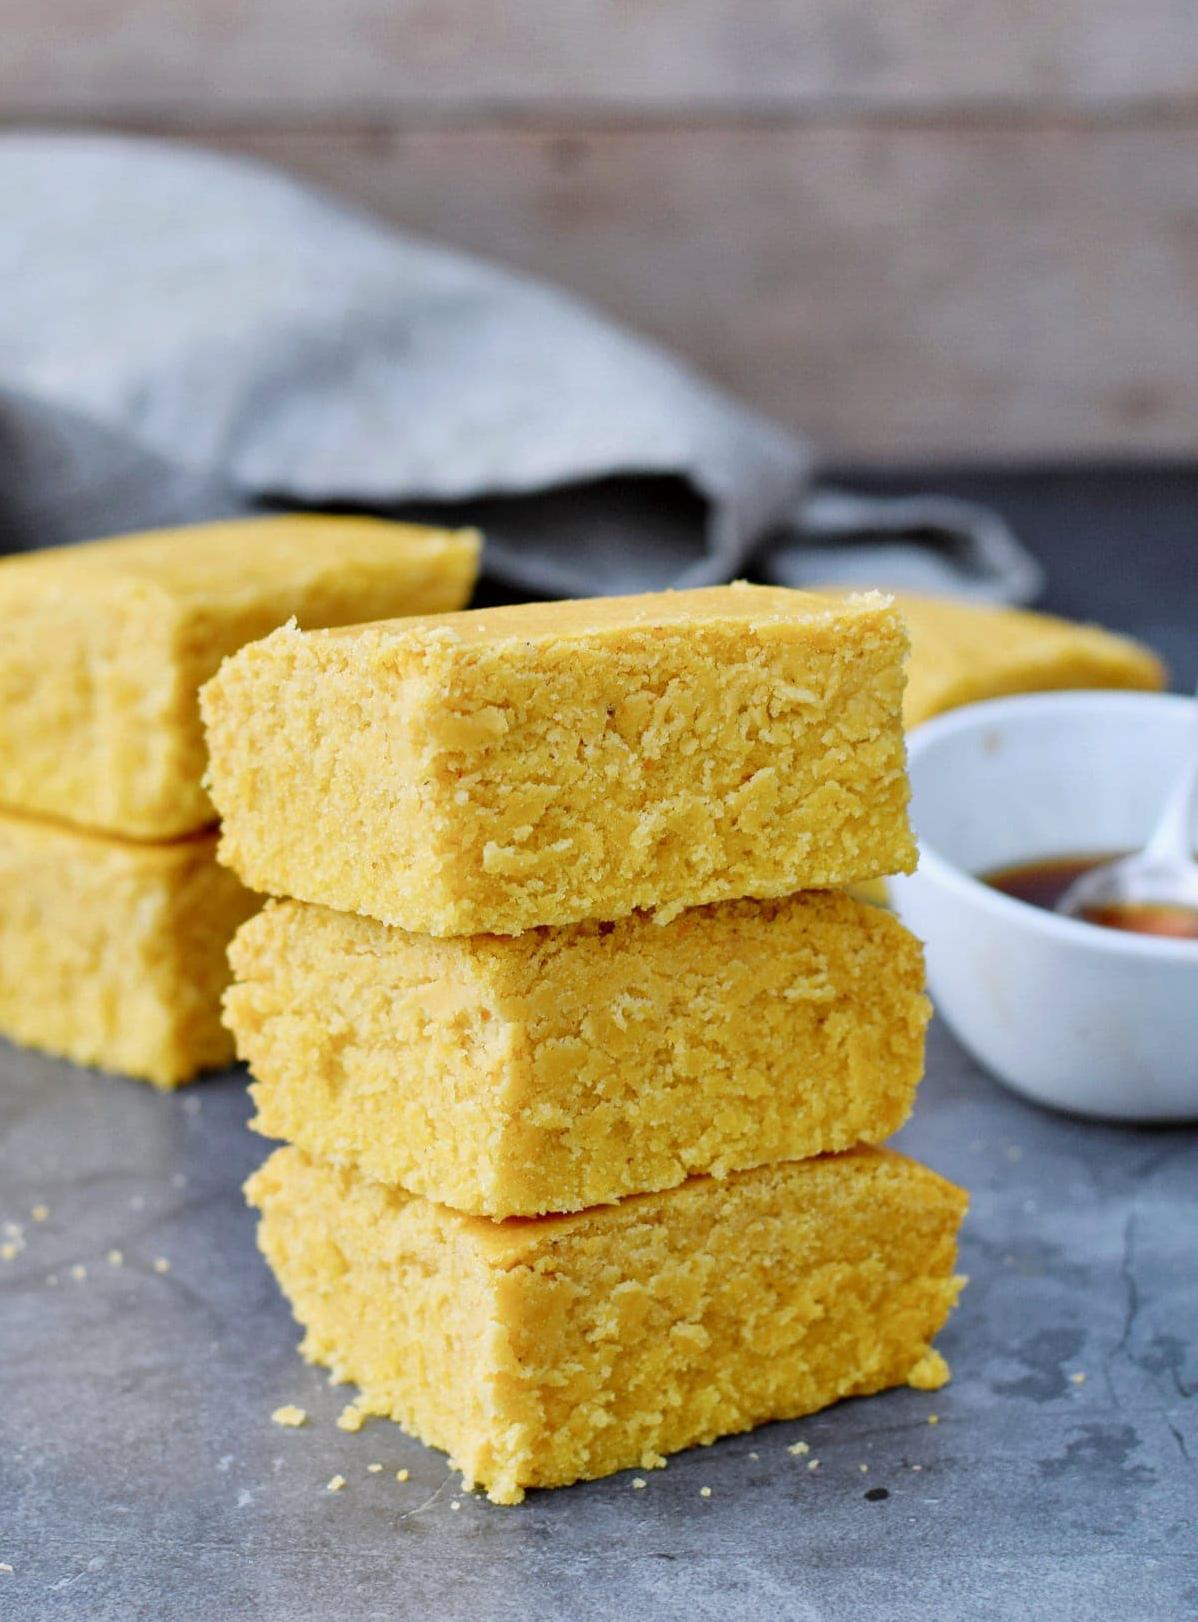  Your happiness is just a slice of cornbread away!